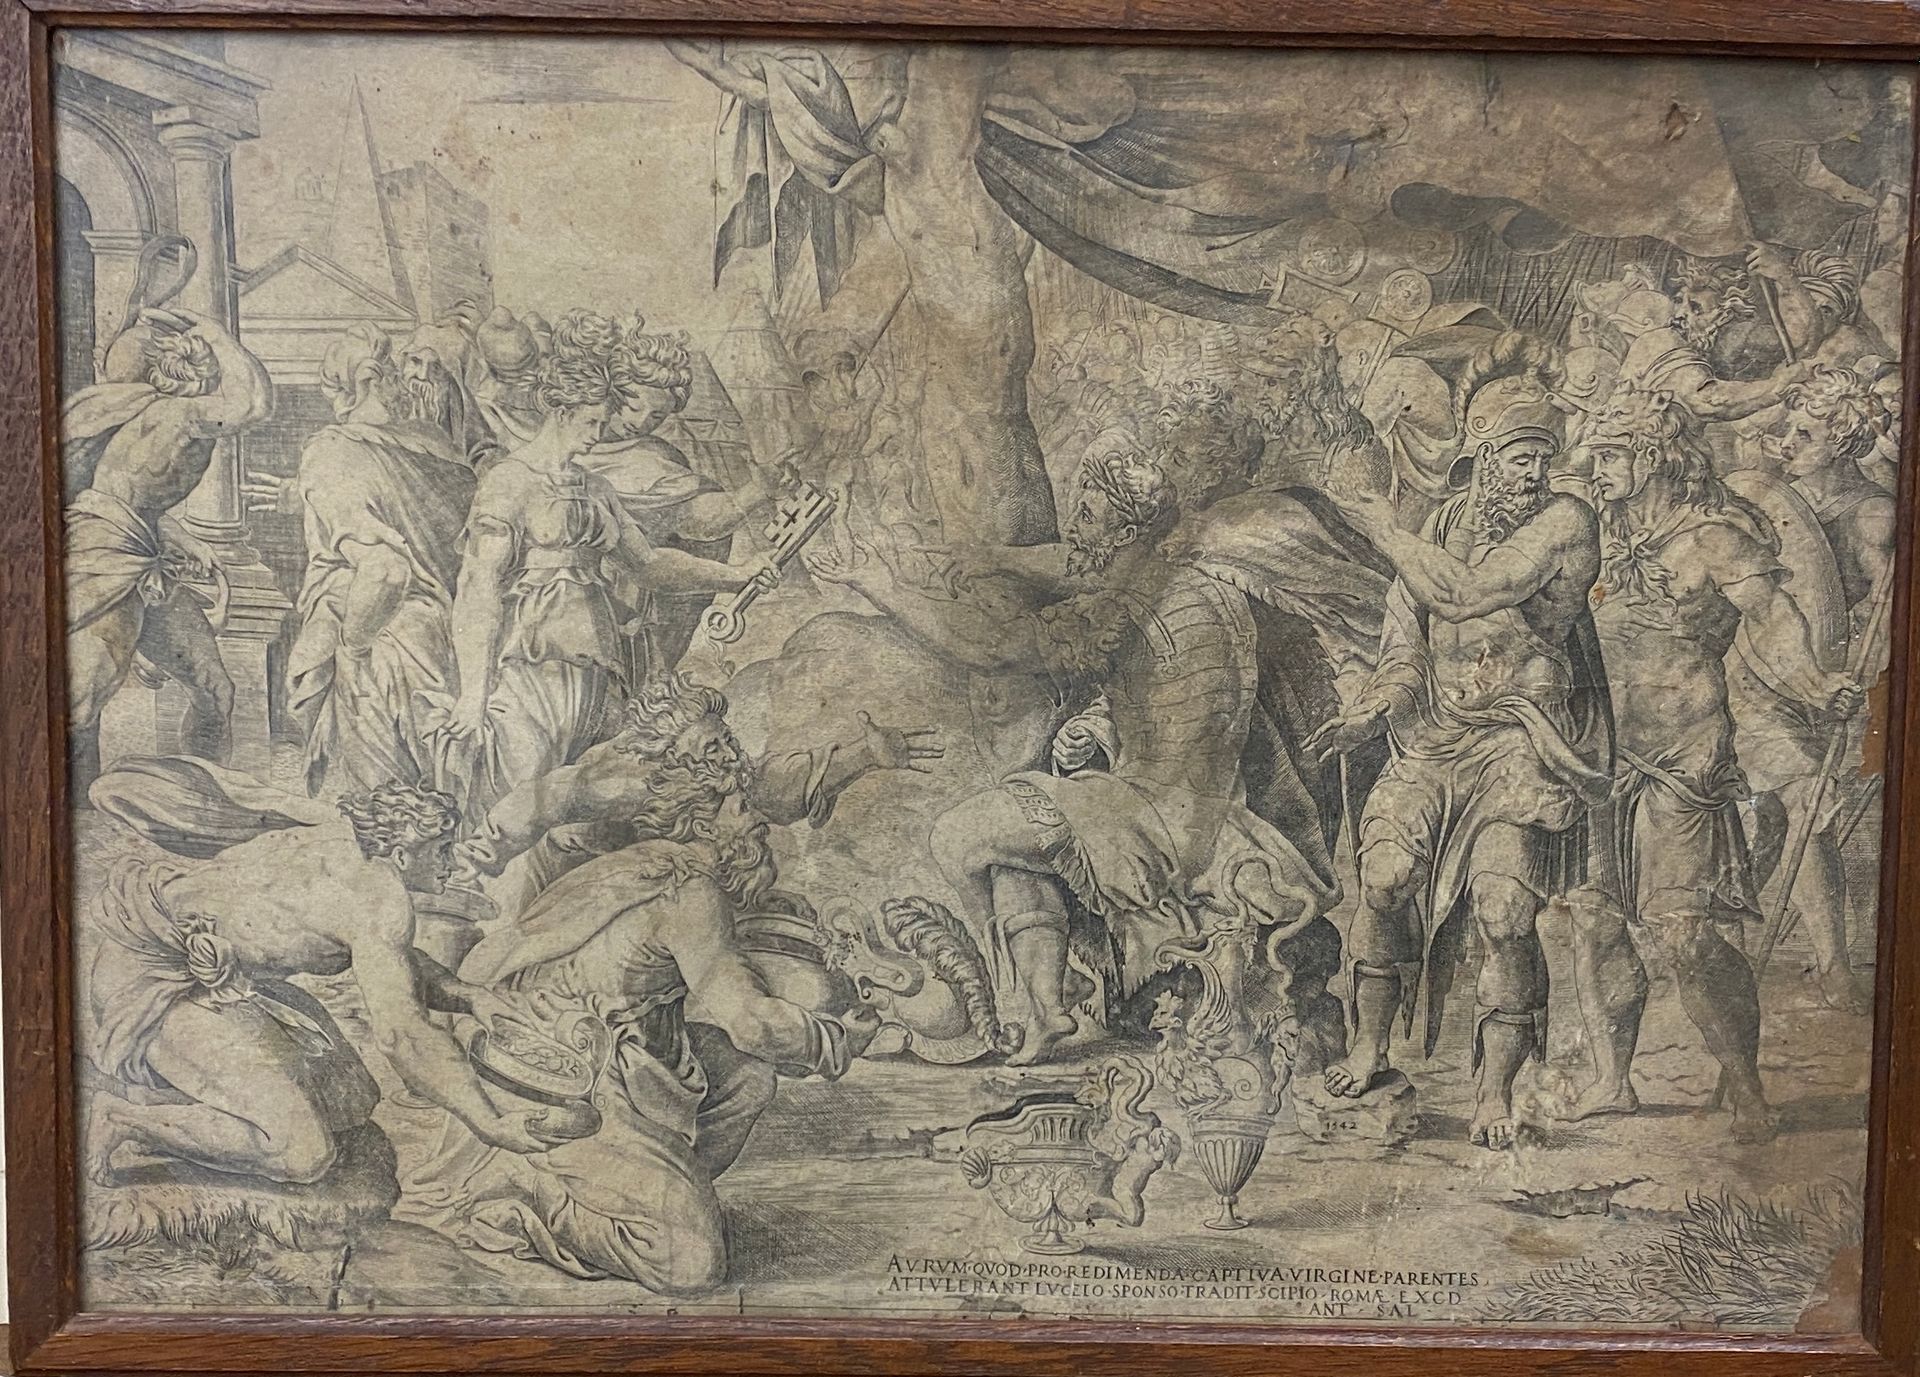 Null Religious scene

Old black engraving 

Accidents

Size : 30 x 42,5cm